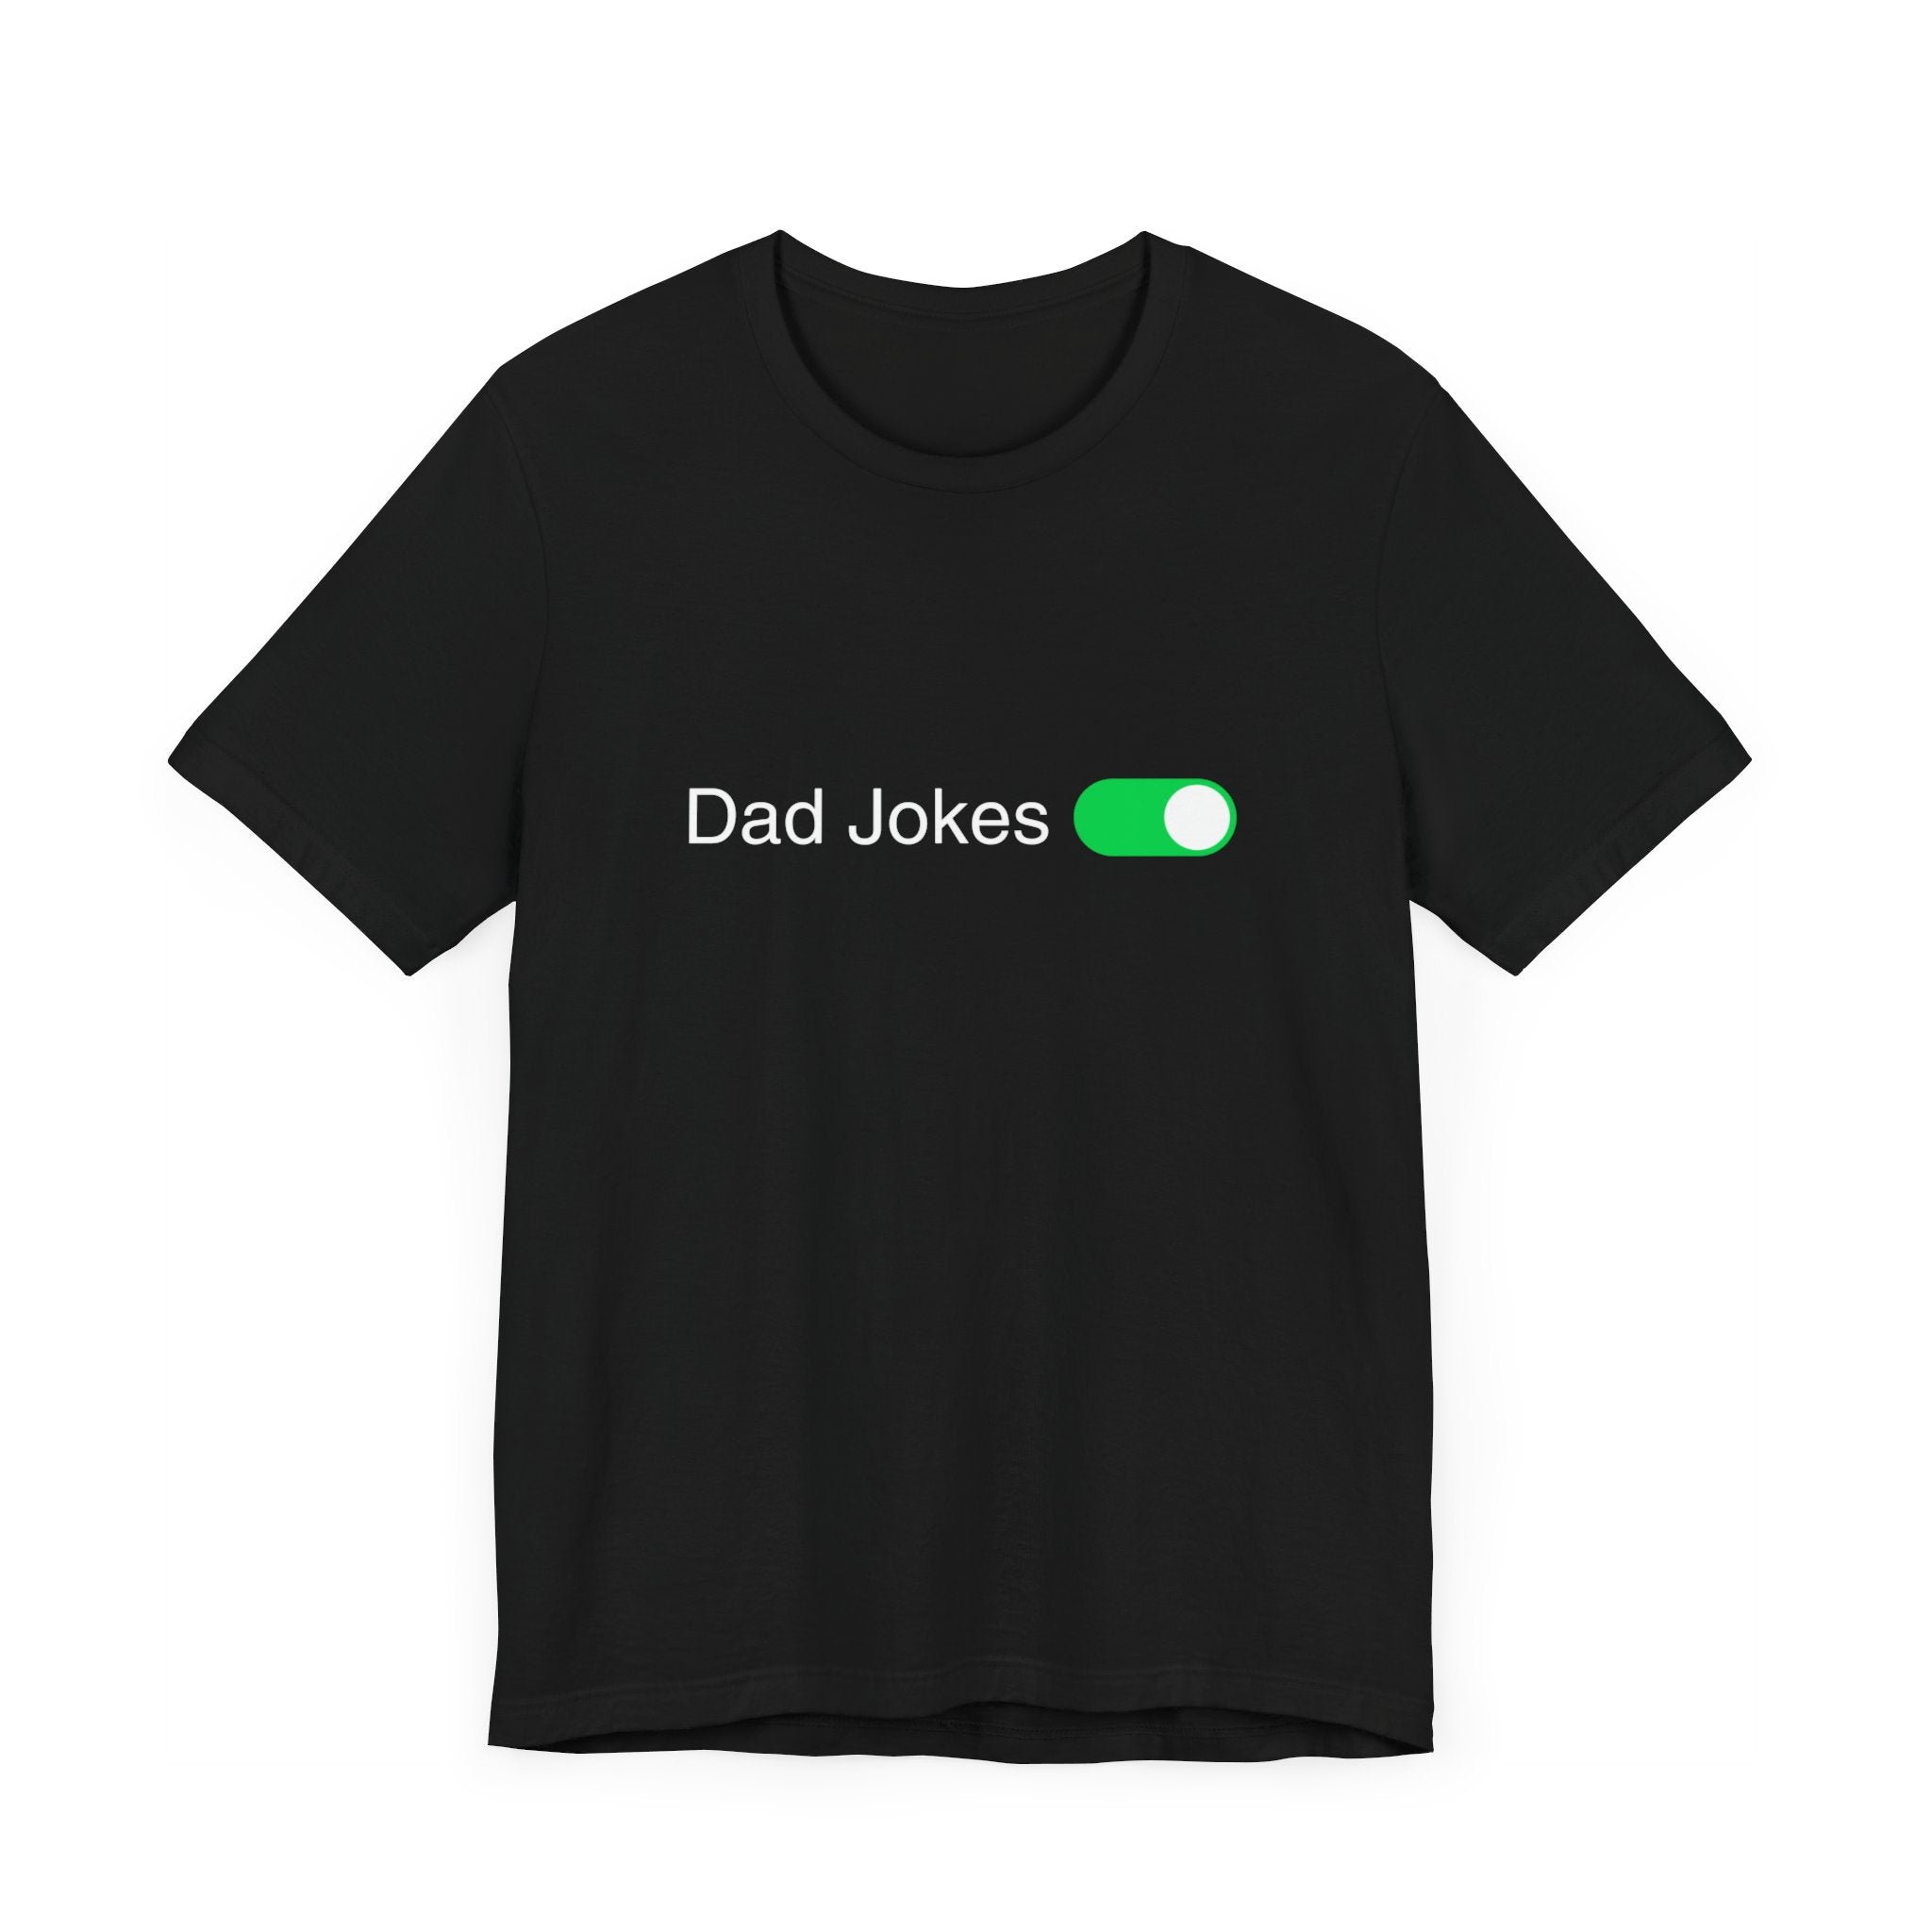 Dad Jokes On Shirt Funny Father’s Day Tee